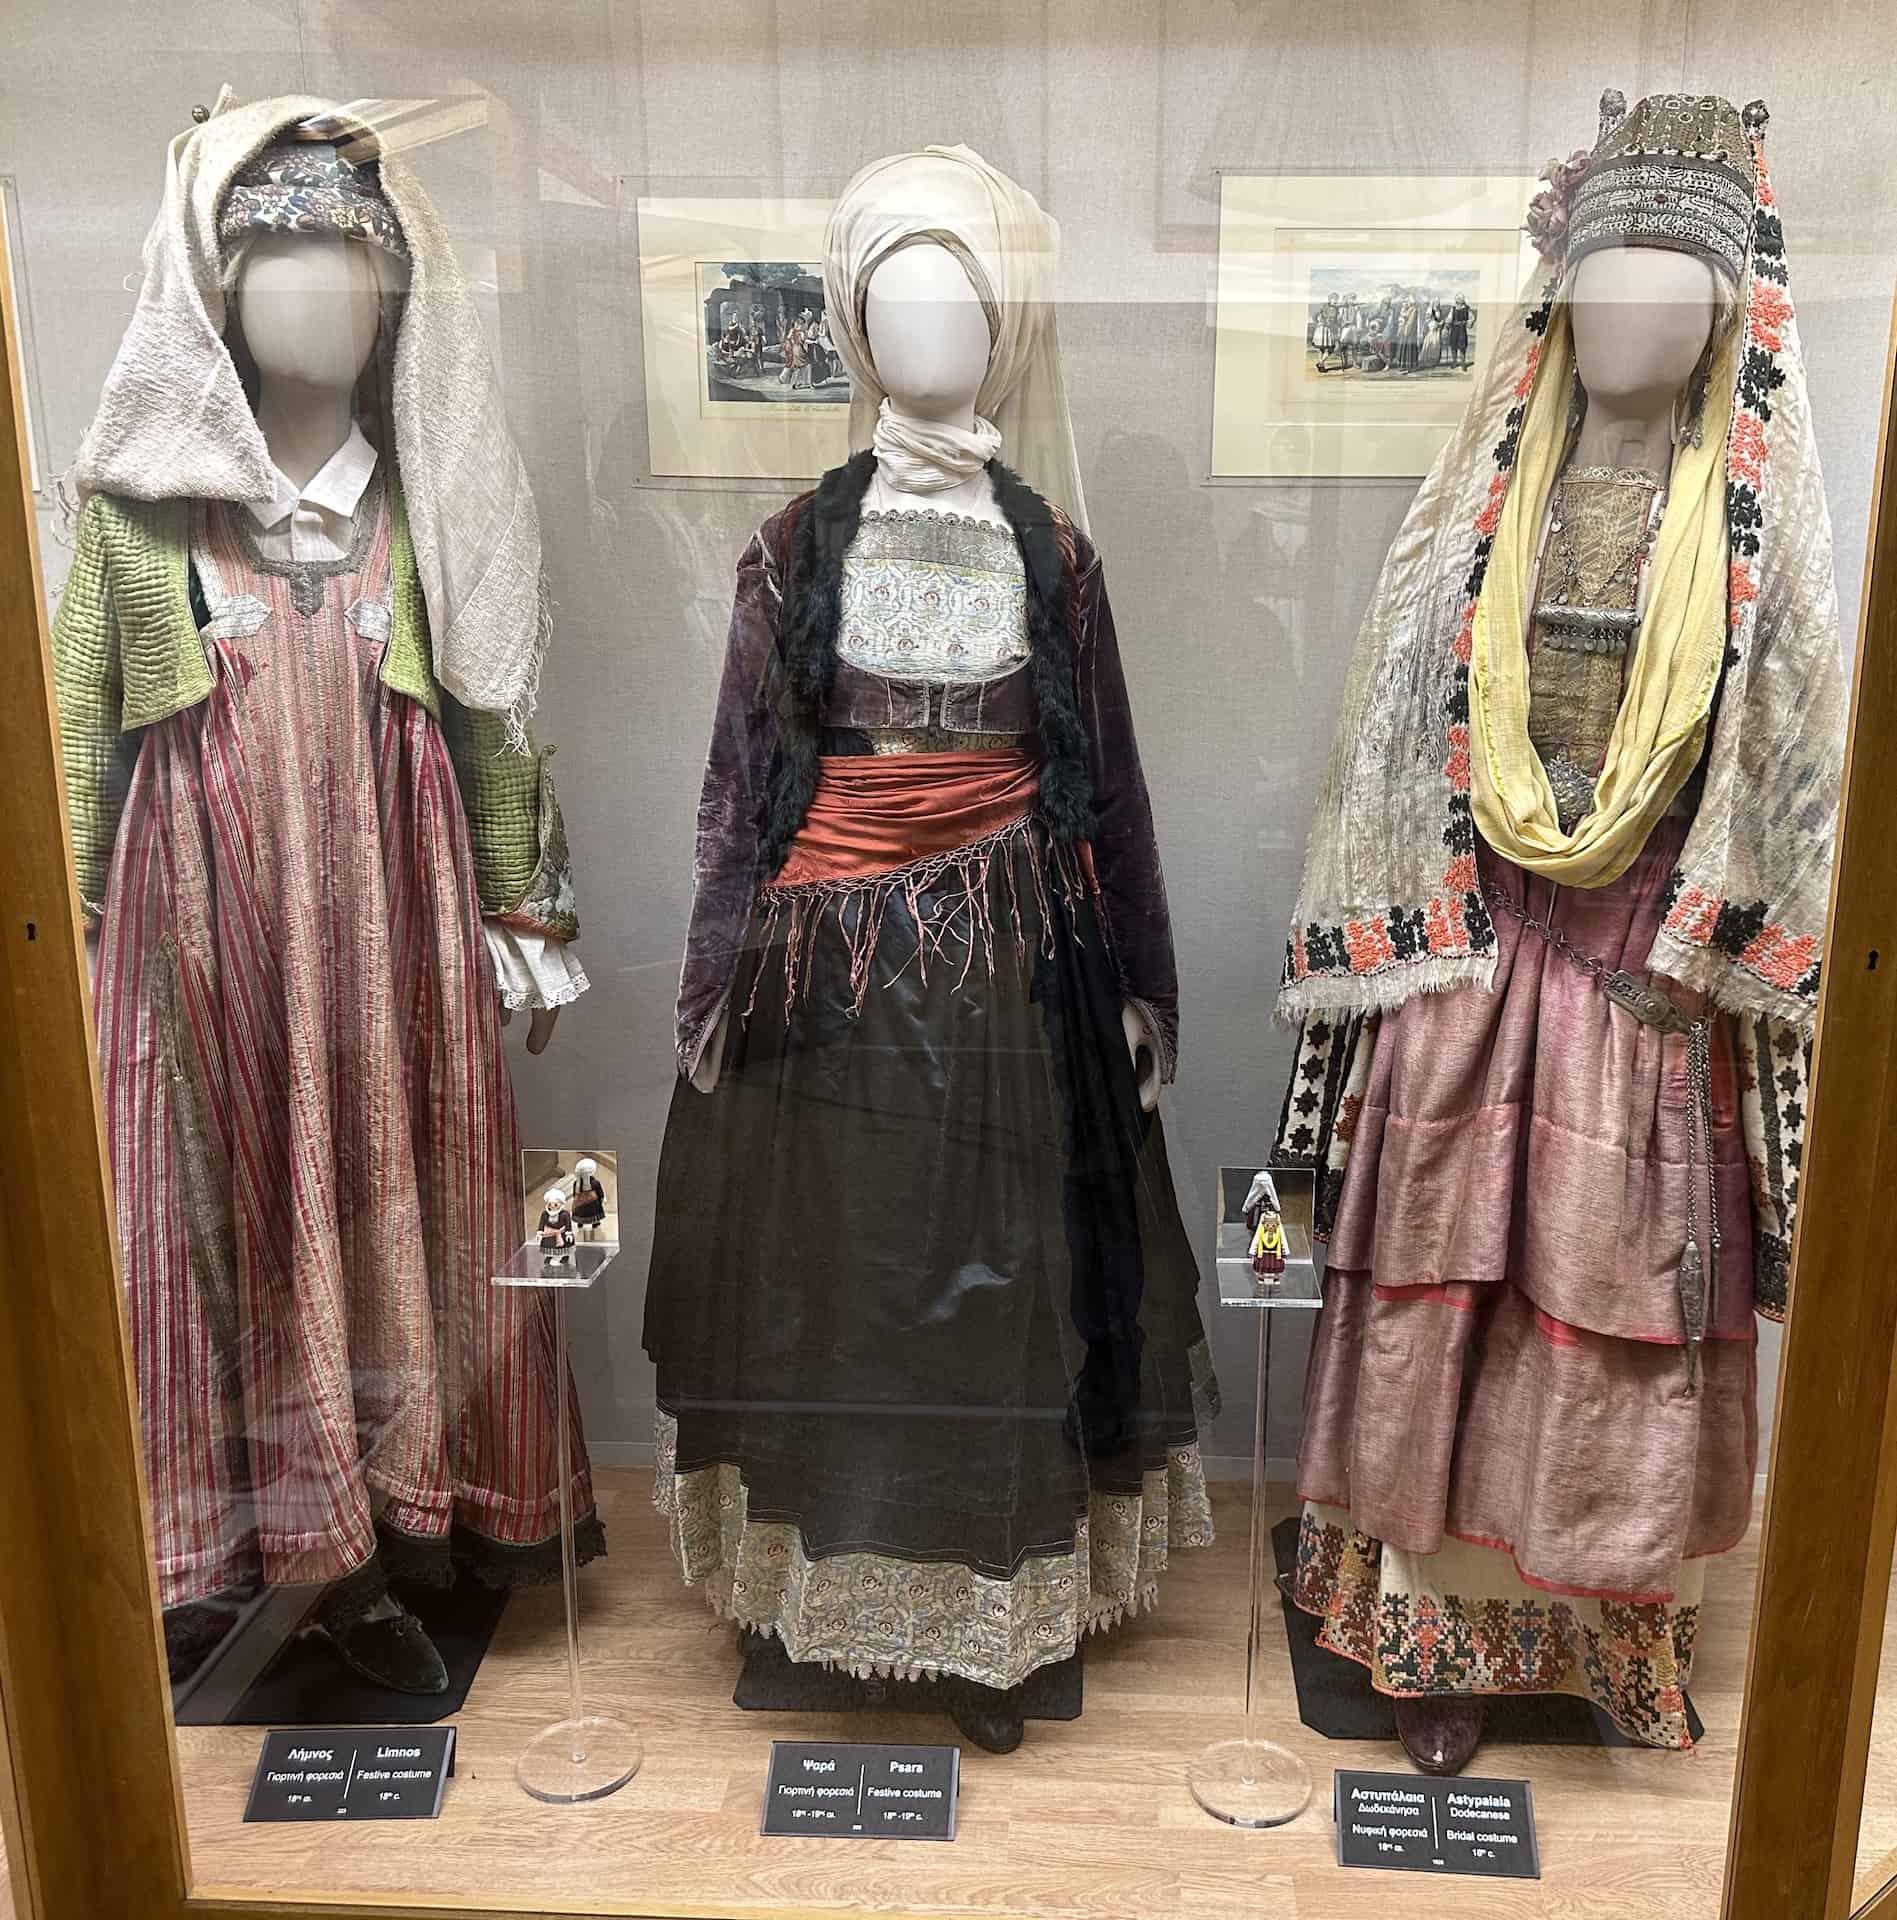 Festive costume from Limnos, 18th century (left); festive costume from Psara, 18th-19th century (center); bridal costume from Astypalaia, Dodecanese, 18th century (right) at the National Historical Museum in Athens, Greece